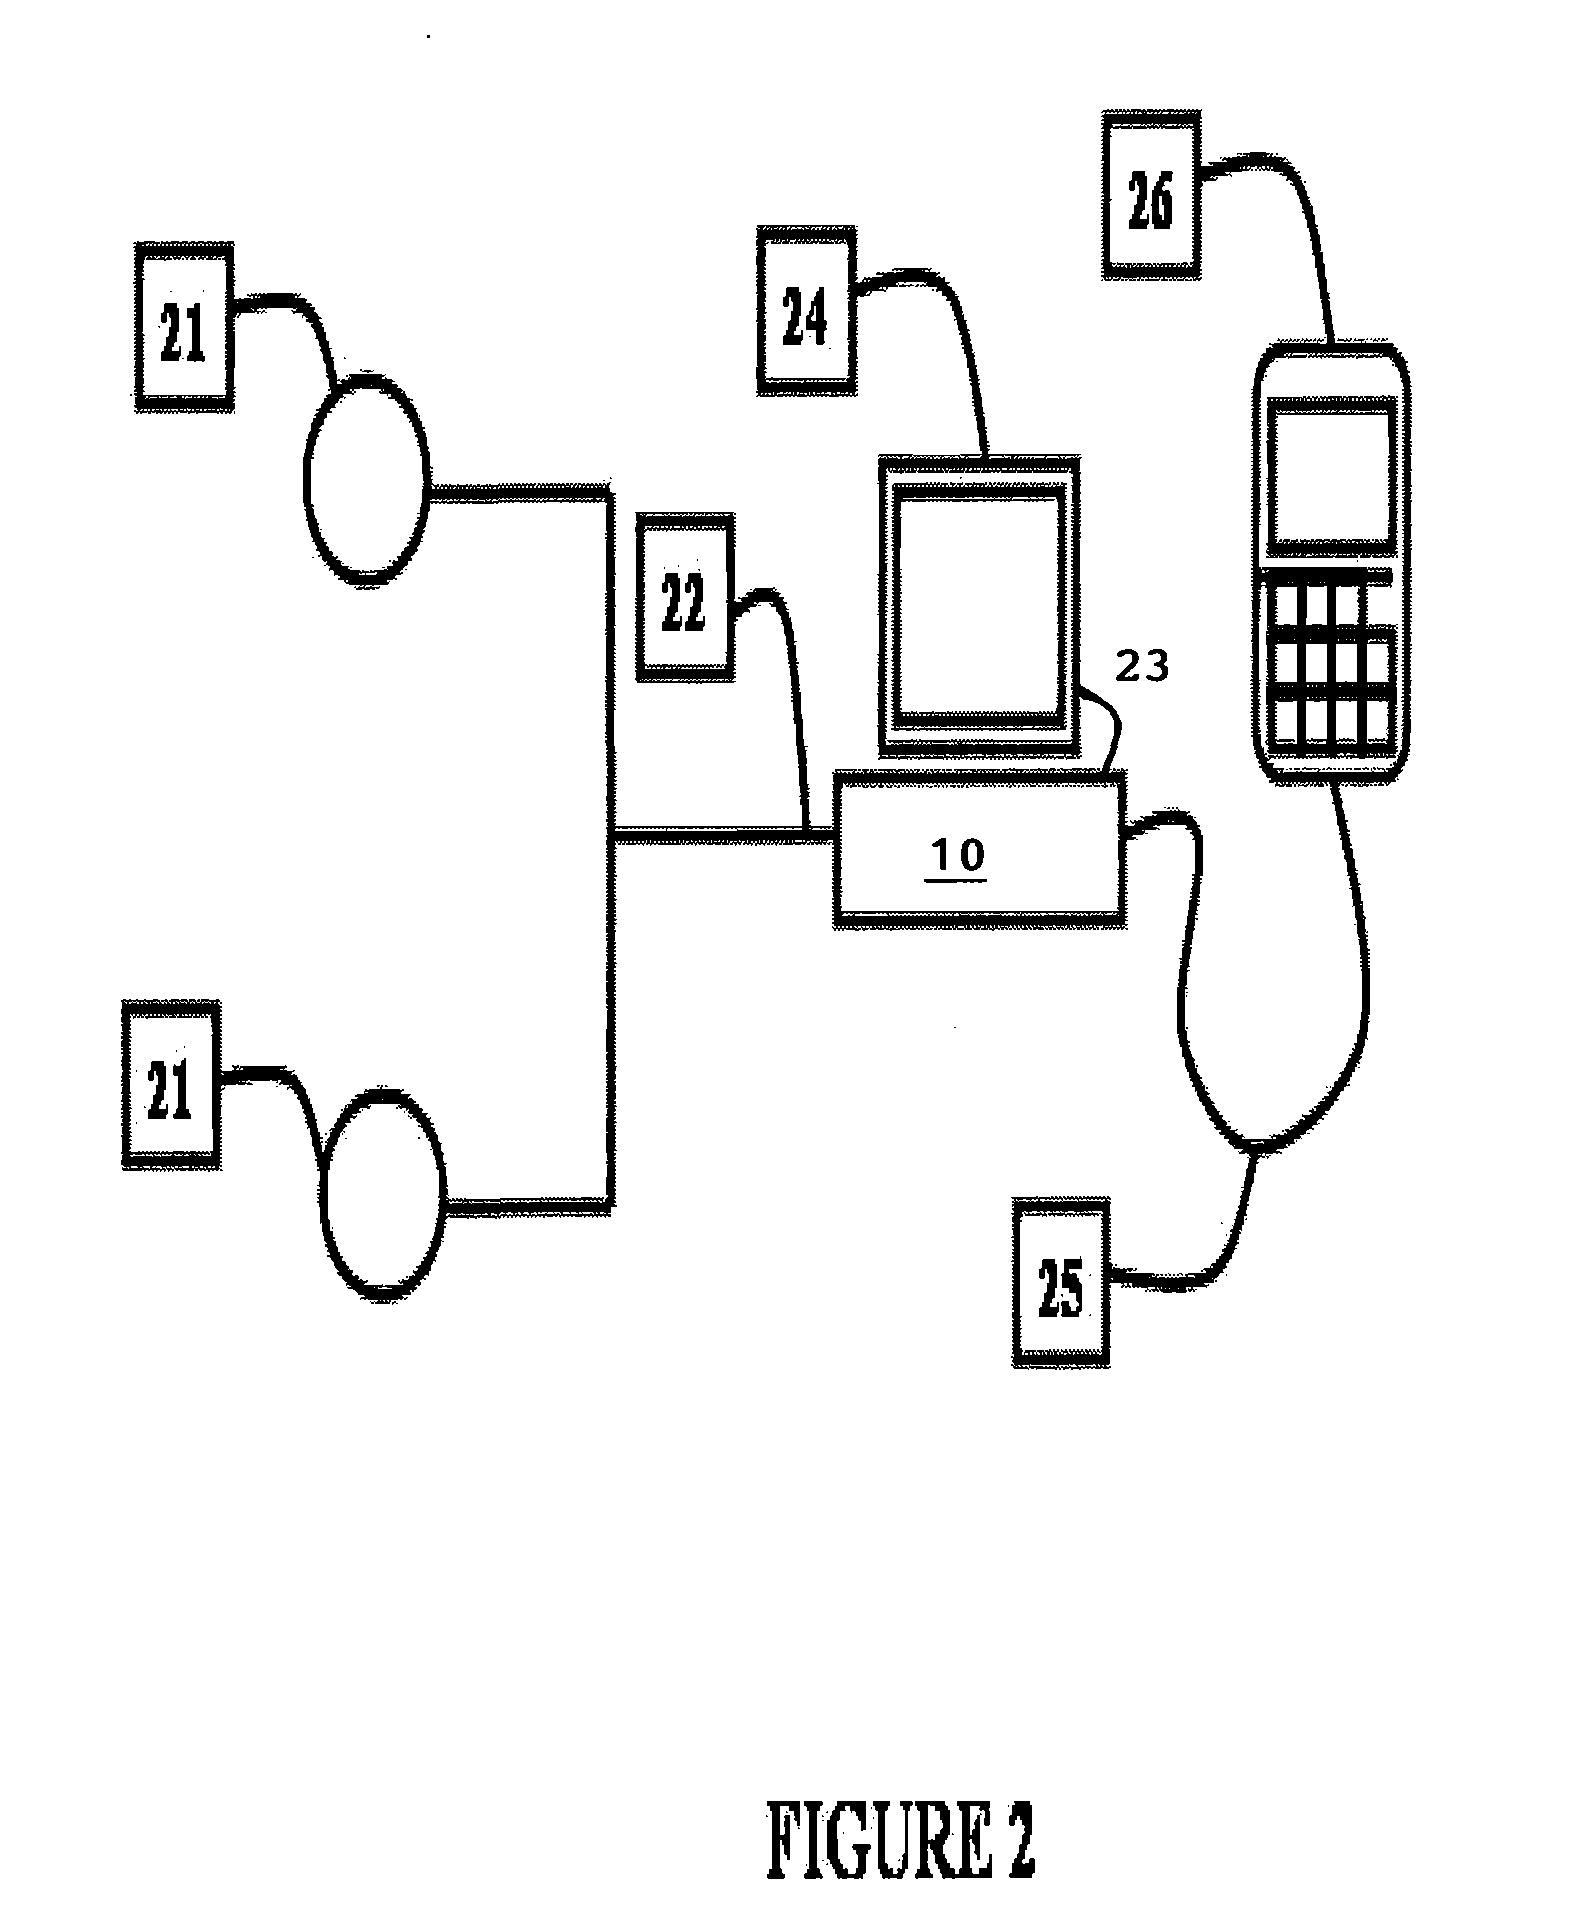 System for optimizing pickup of goods by a purchaser from a vendor using location-based advertising